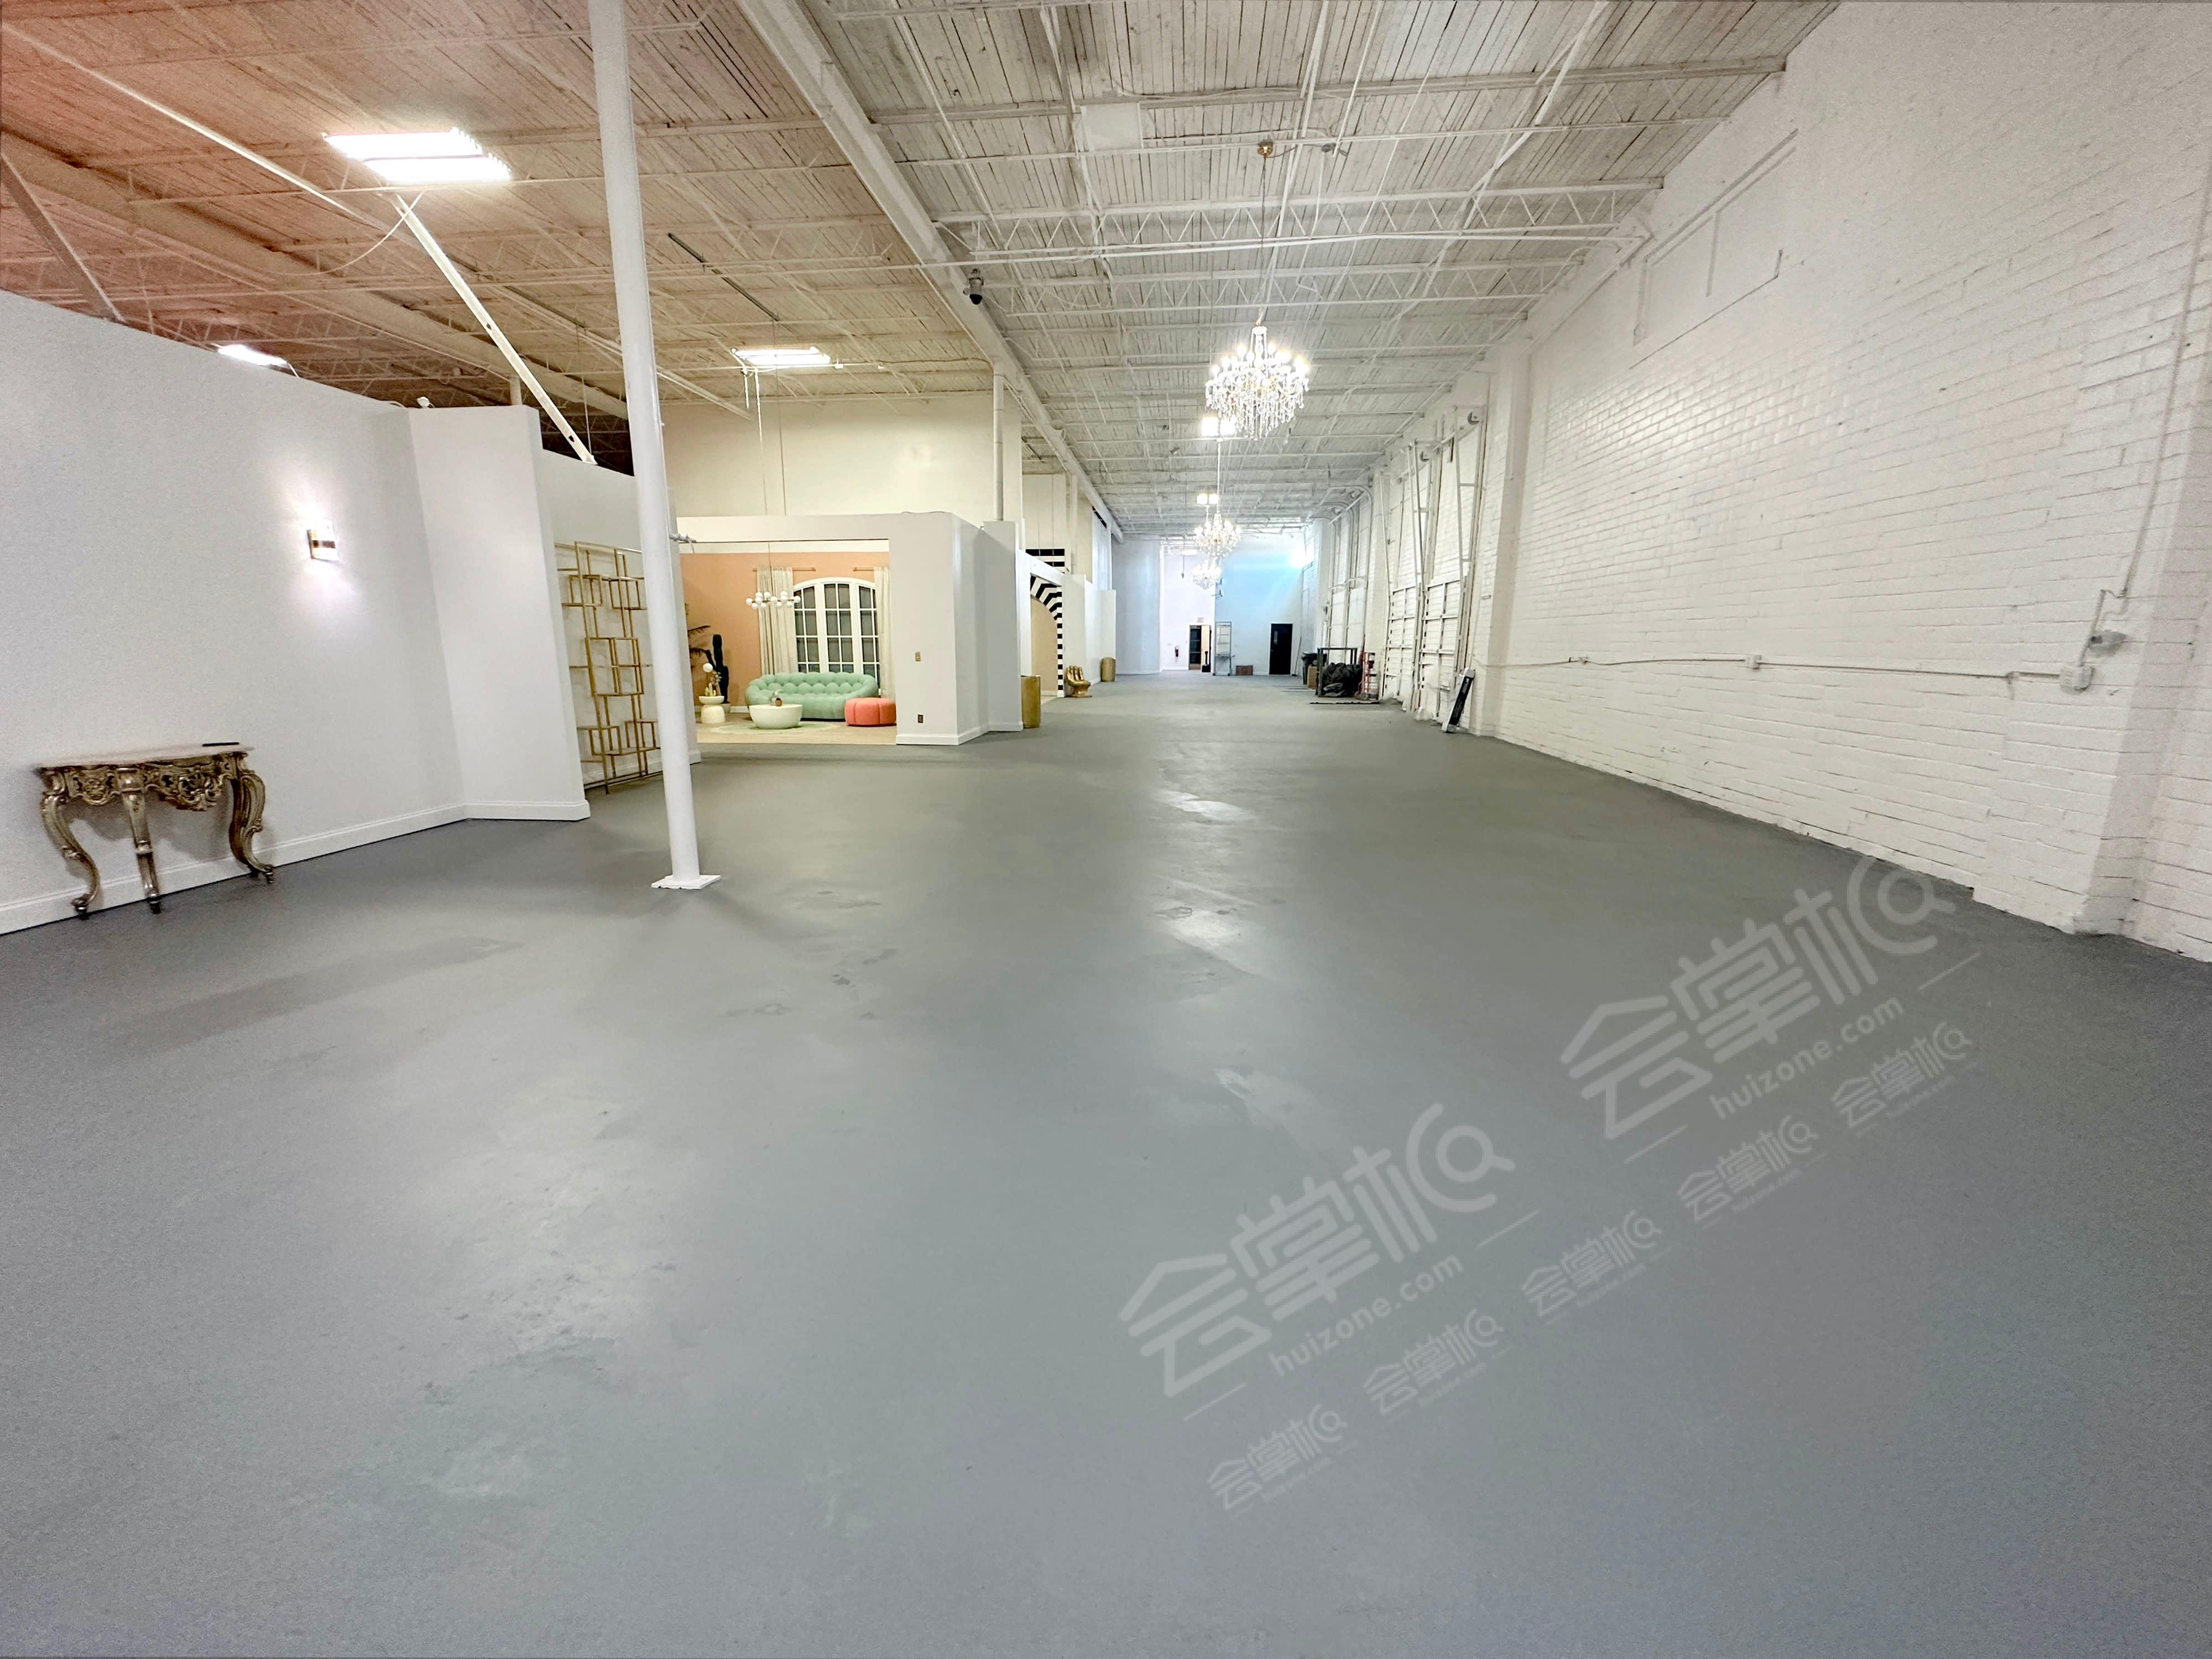 NEW 25,000 sq. ft. creative event space warehouse